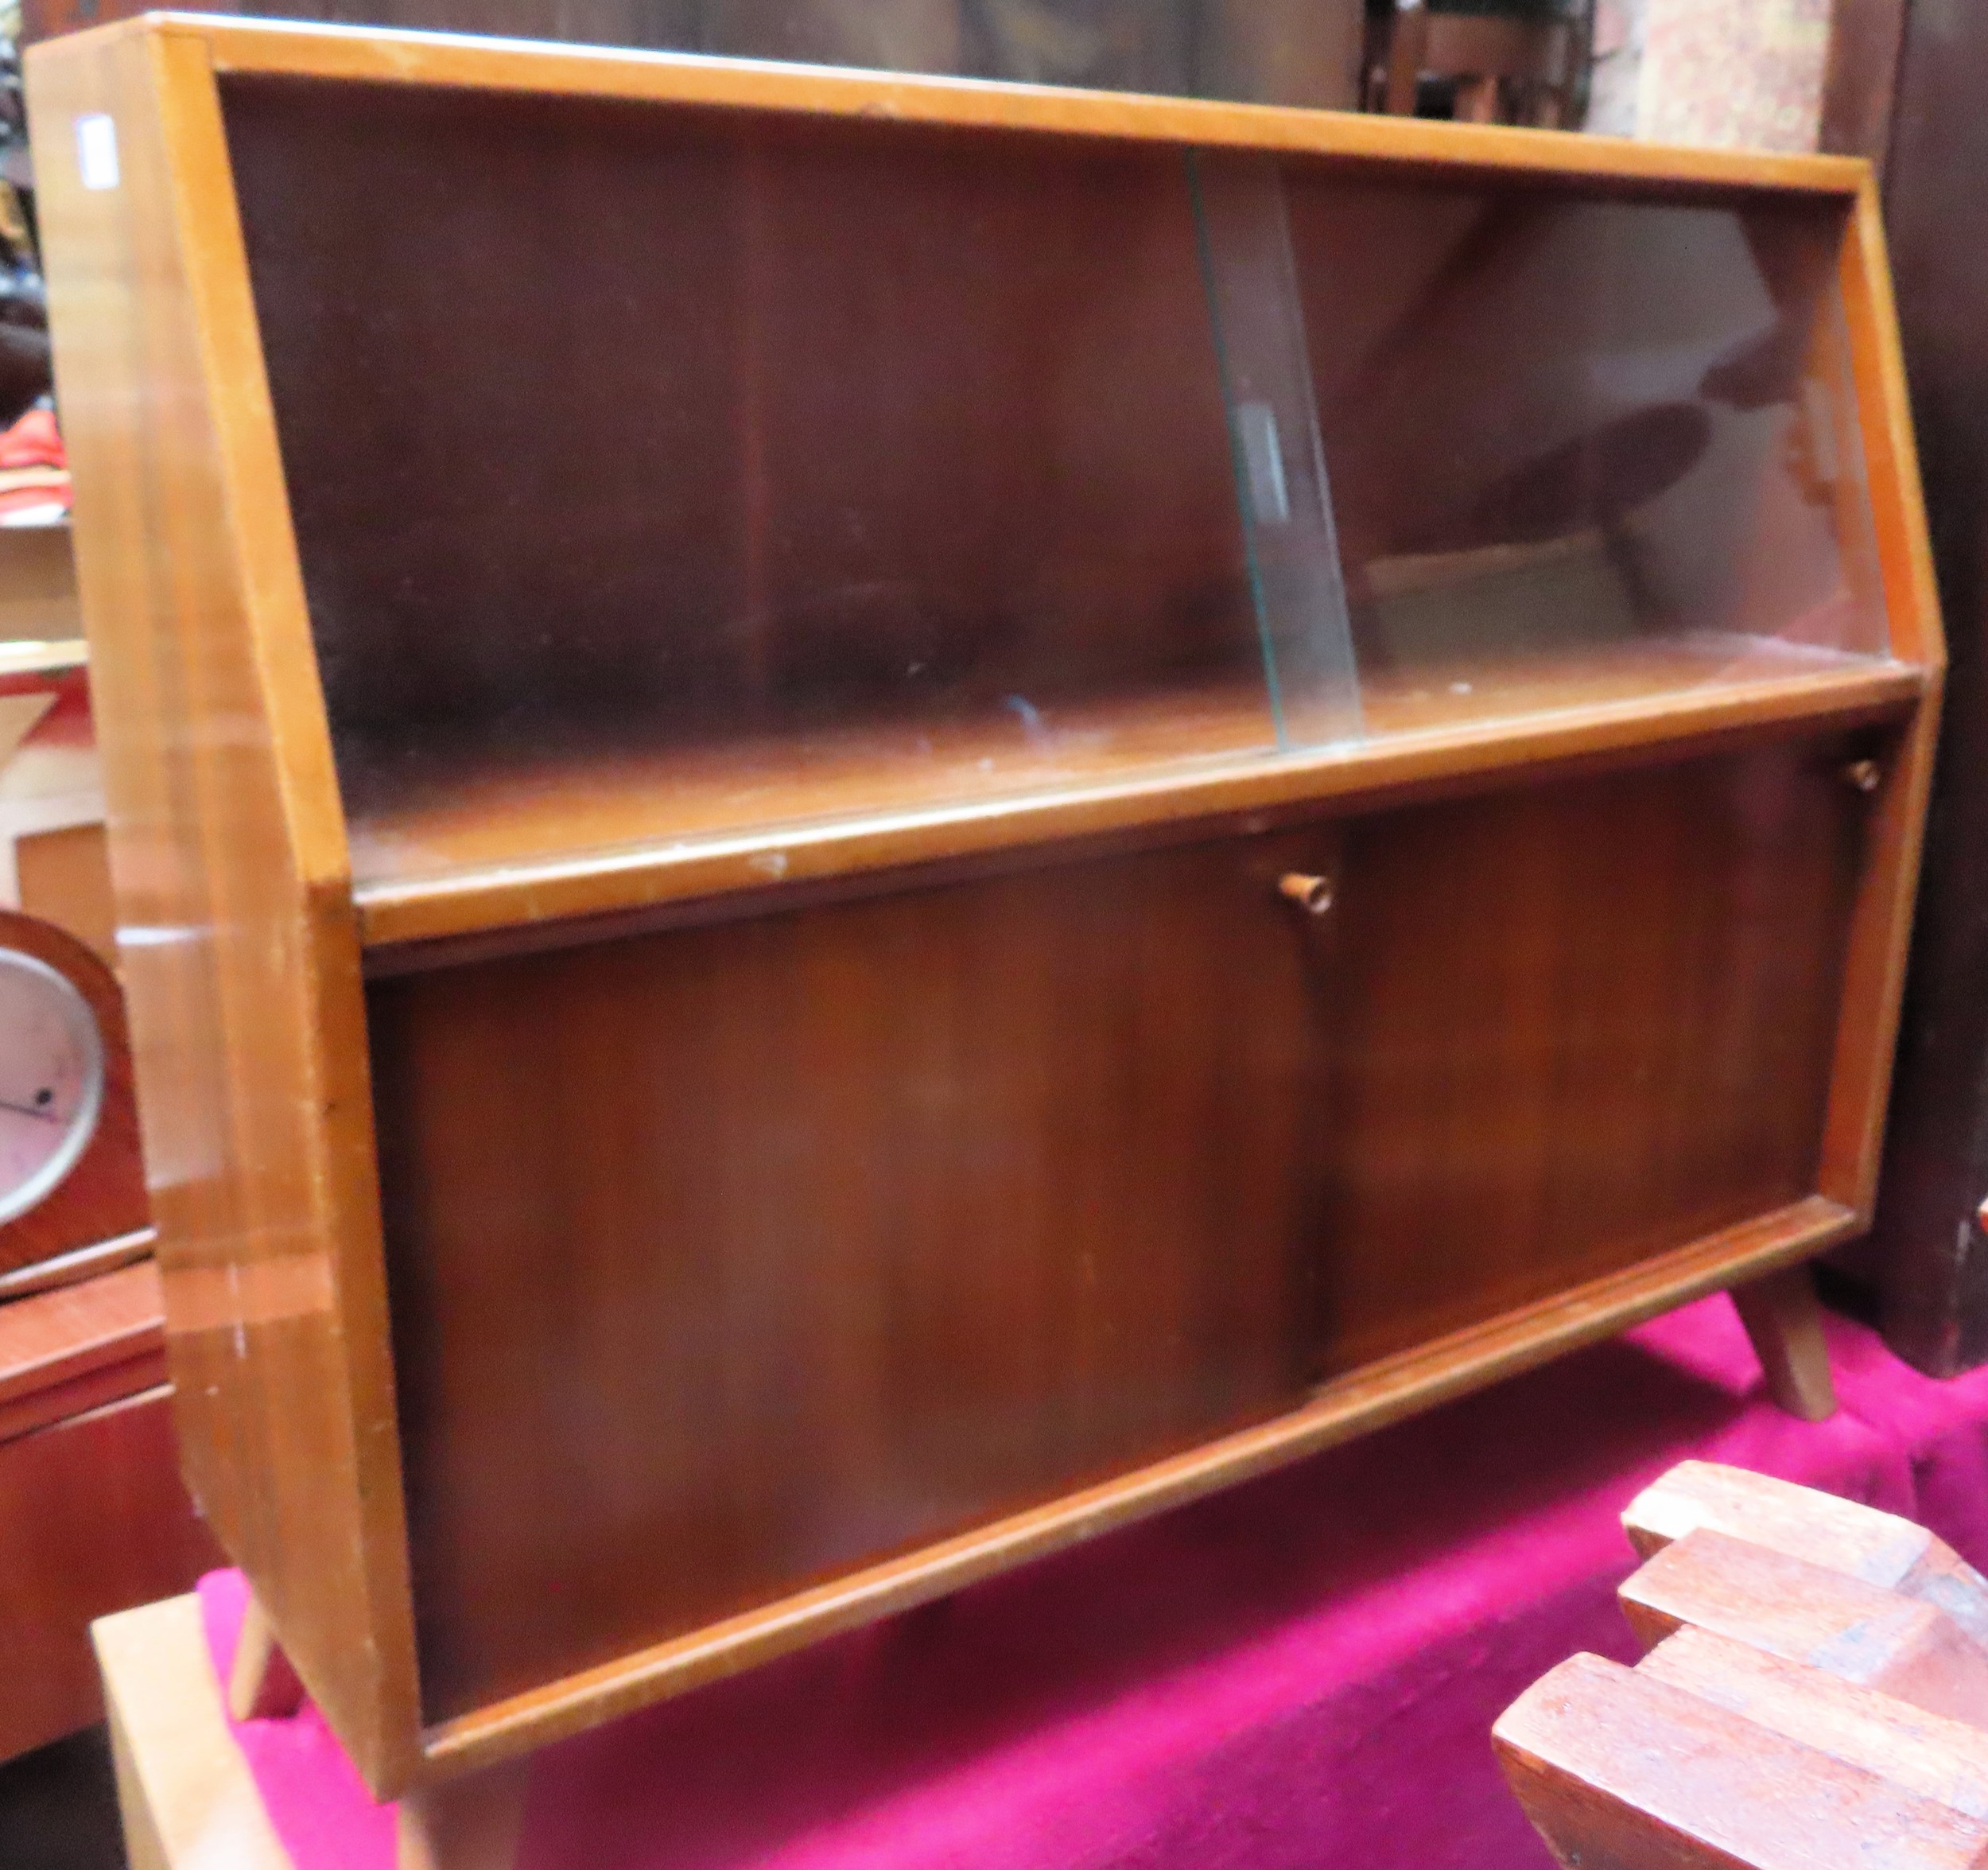 1970's small teak side cabinet with sliding doors. Approx. 76cm H x 92cm W x 28cm D